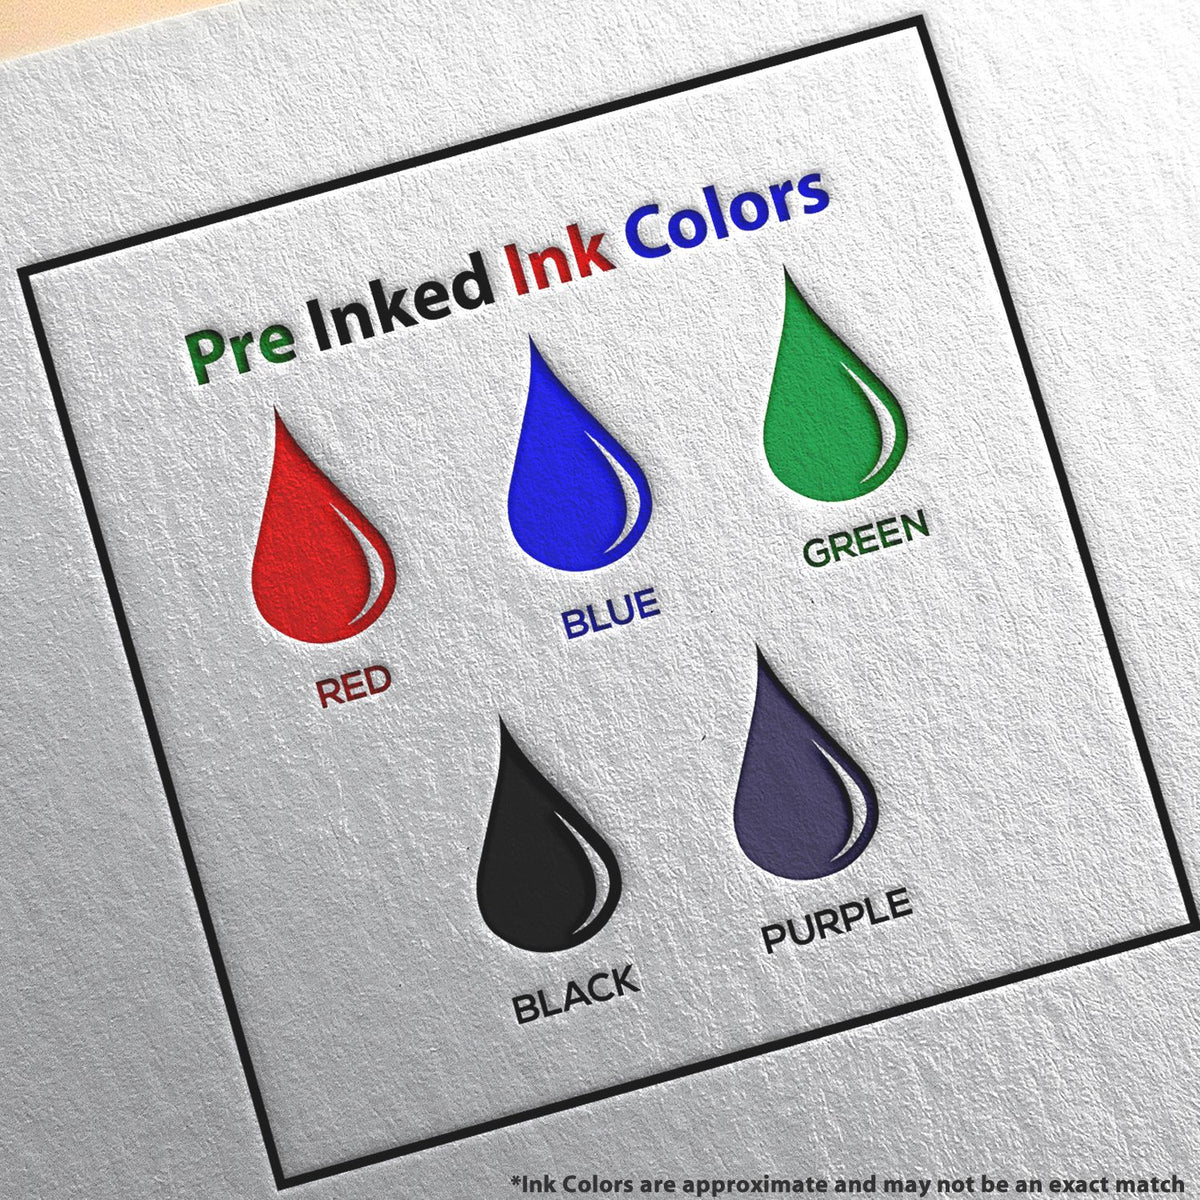 A picture showing the different ink colors or hues available for the Slim Pre-Inked New Mexico Professional Engineer Seal Stamp product.